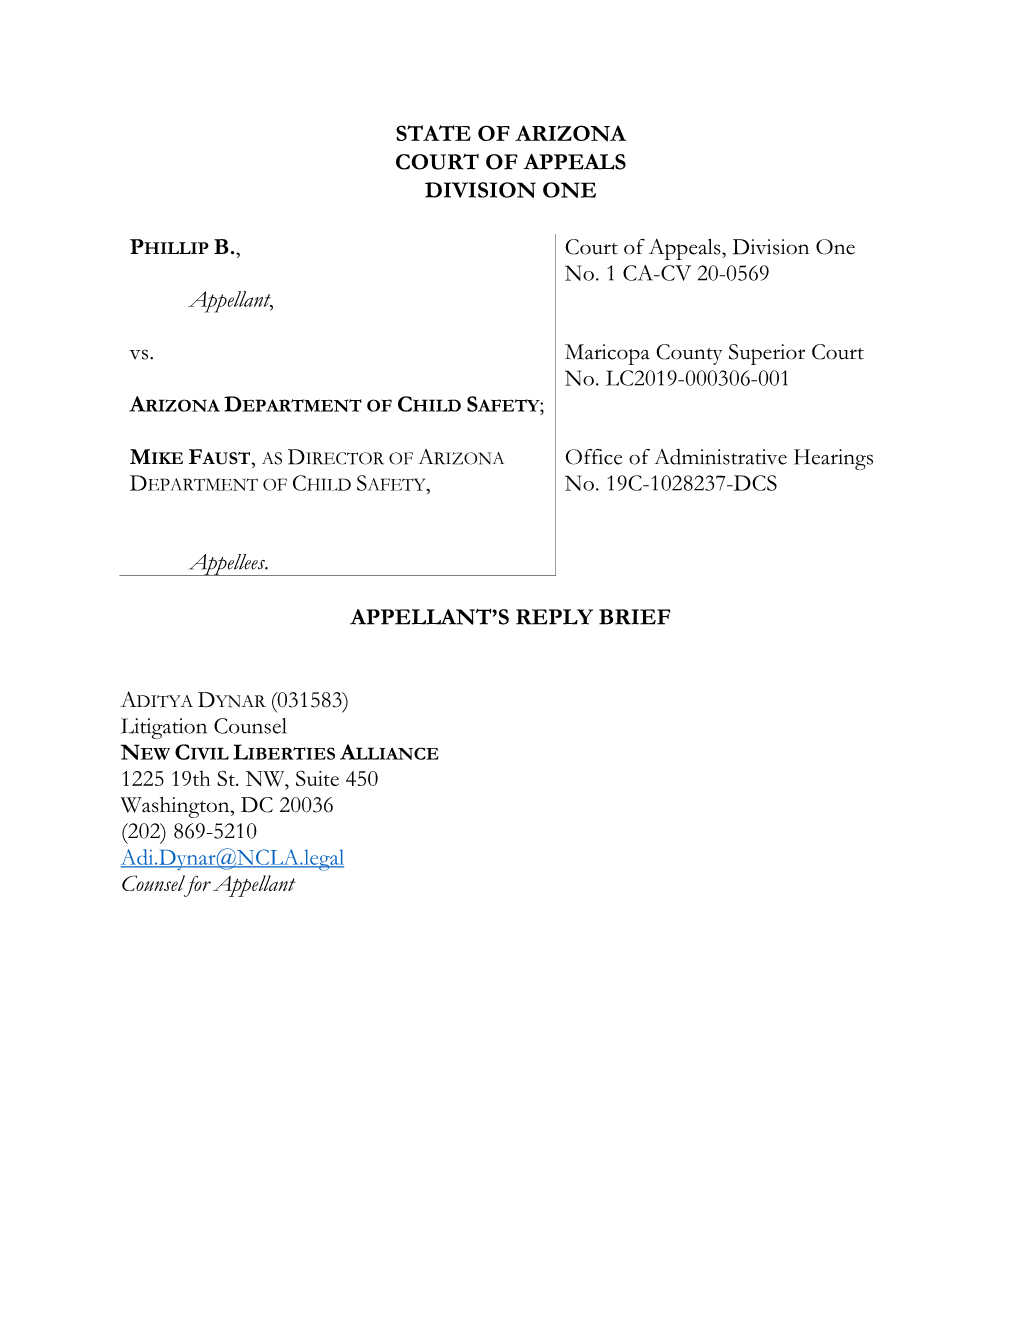 STATE of ARIZONA COURT of APPEALS DIVISION ONE Appellant